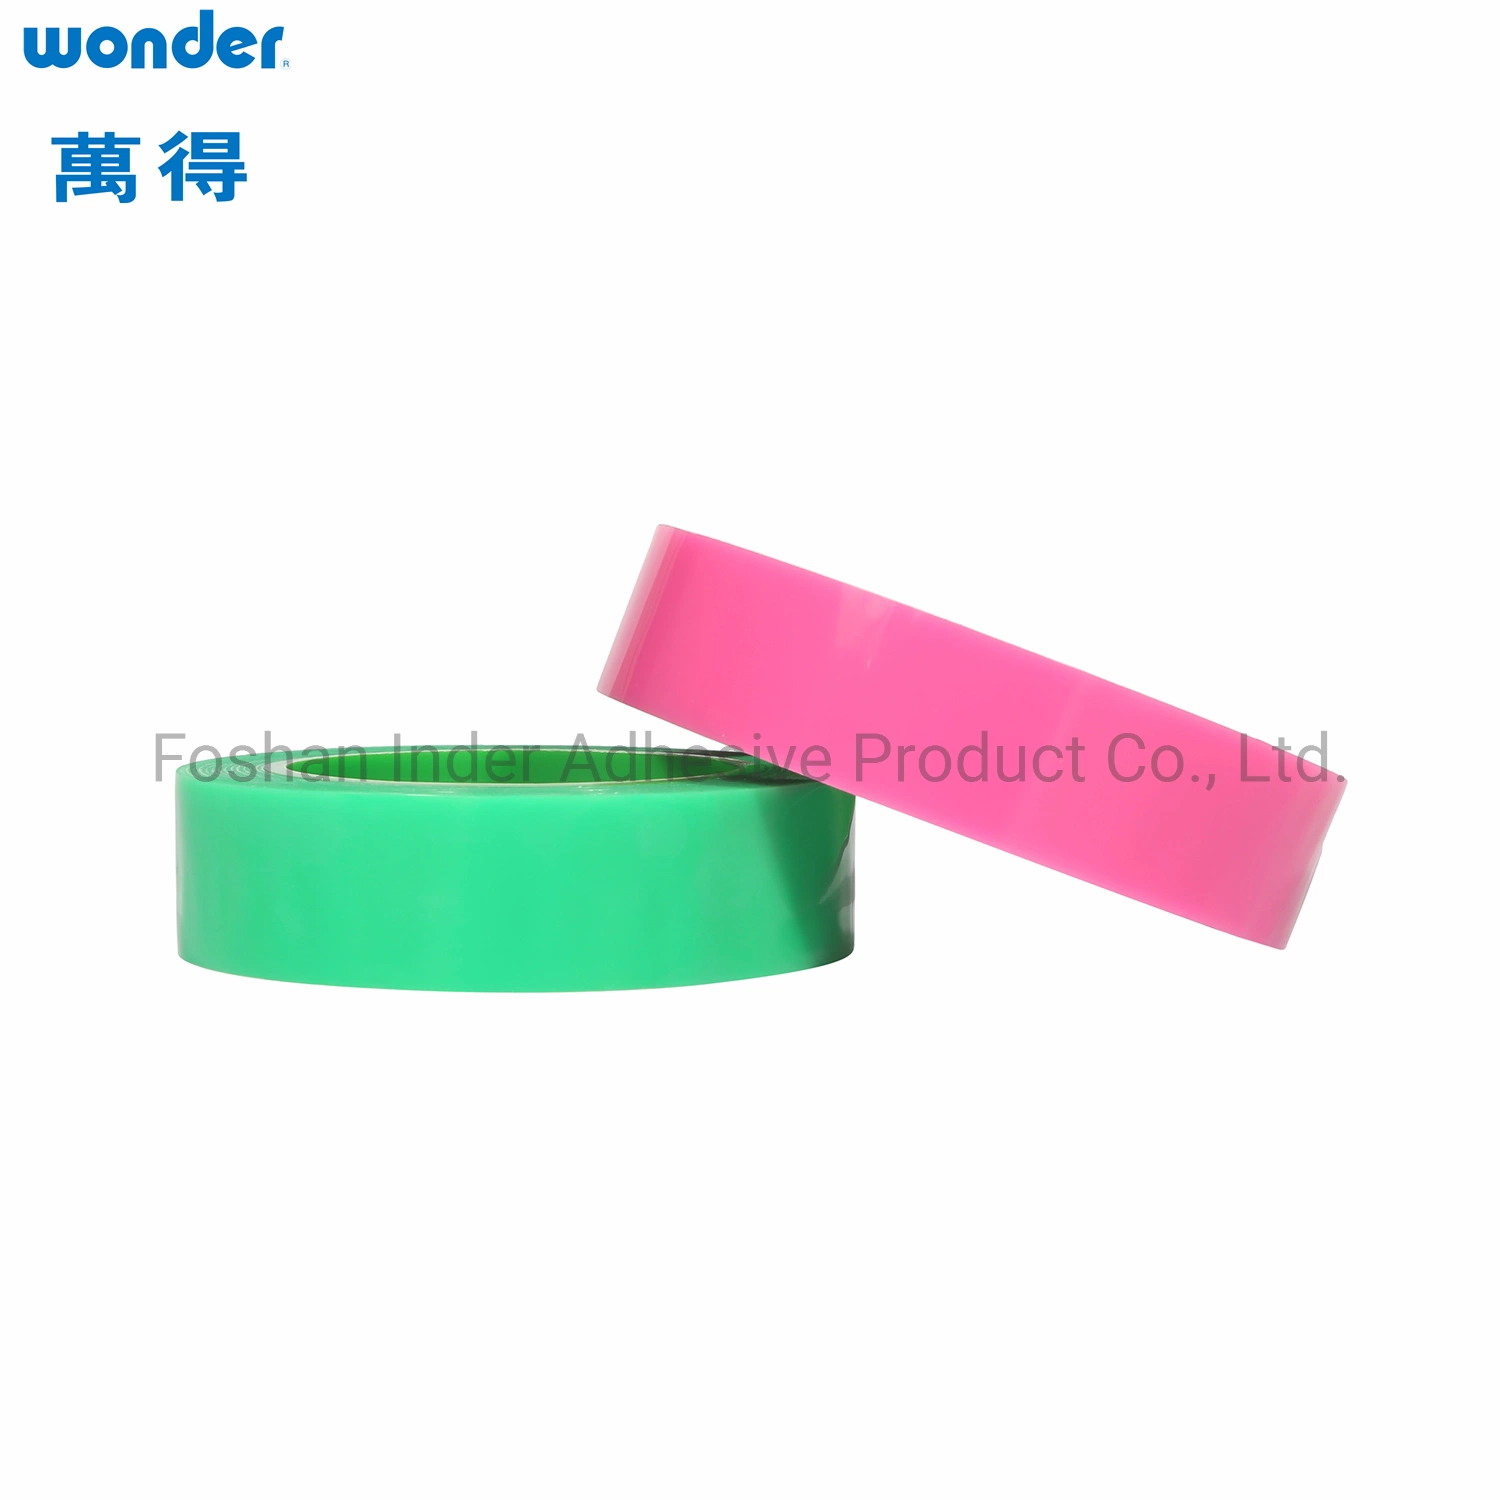 Wonder Brand Reliale Quality Stationery Tape/ /BOPP Tape Dispenser/ /Cutter for Office